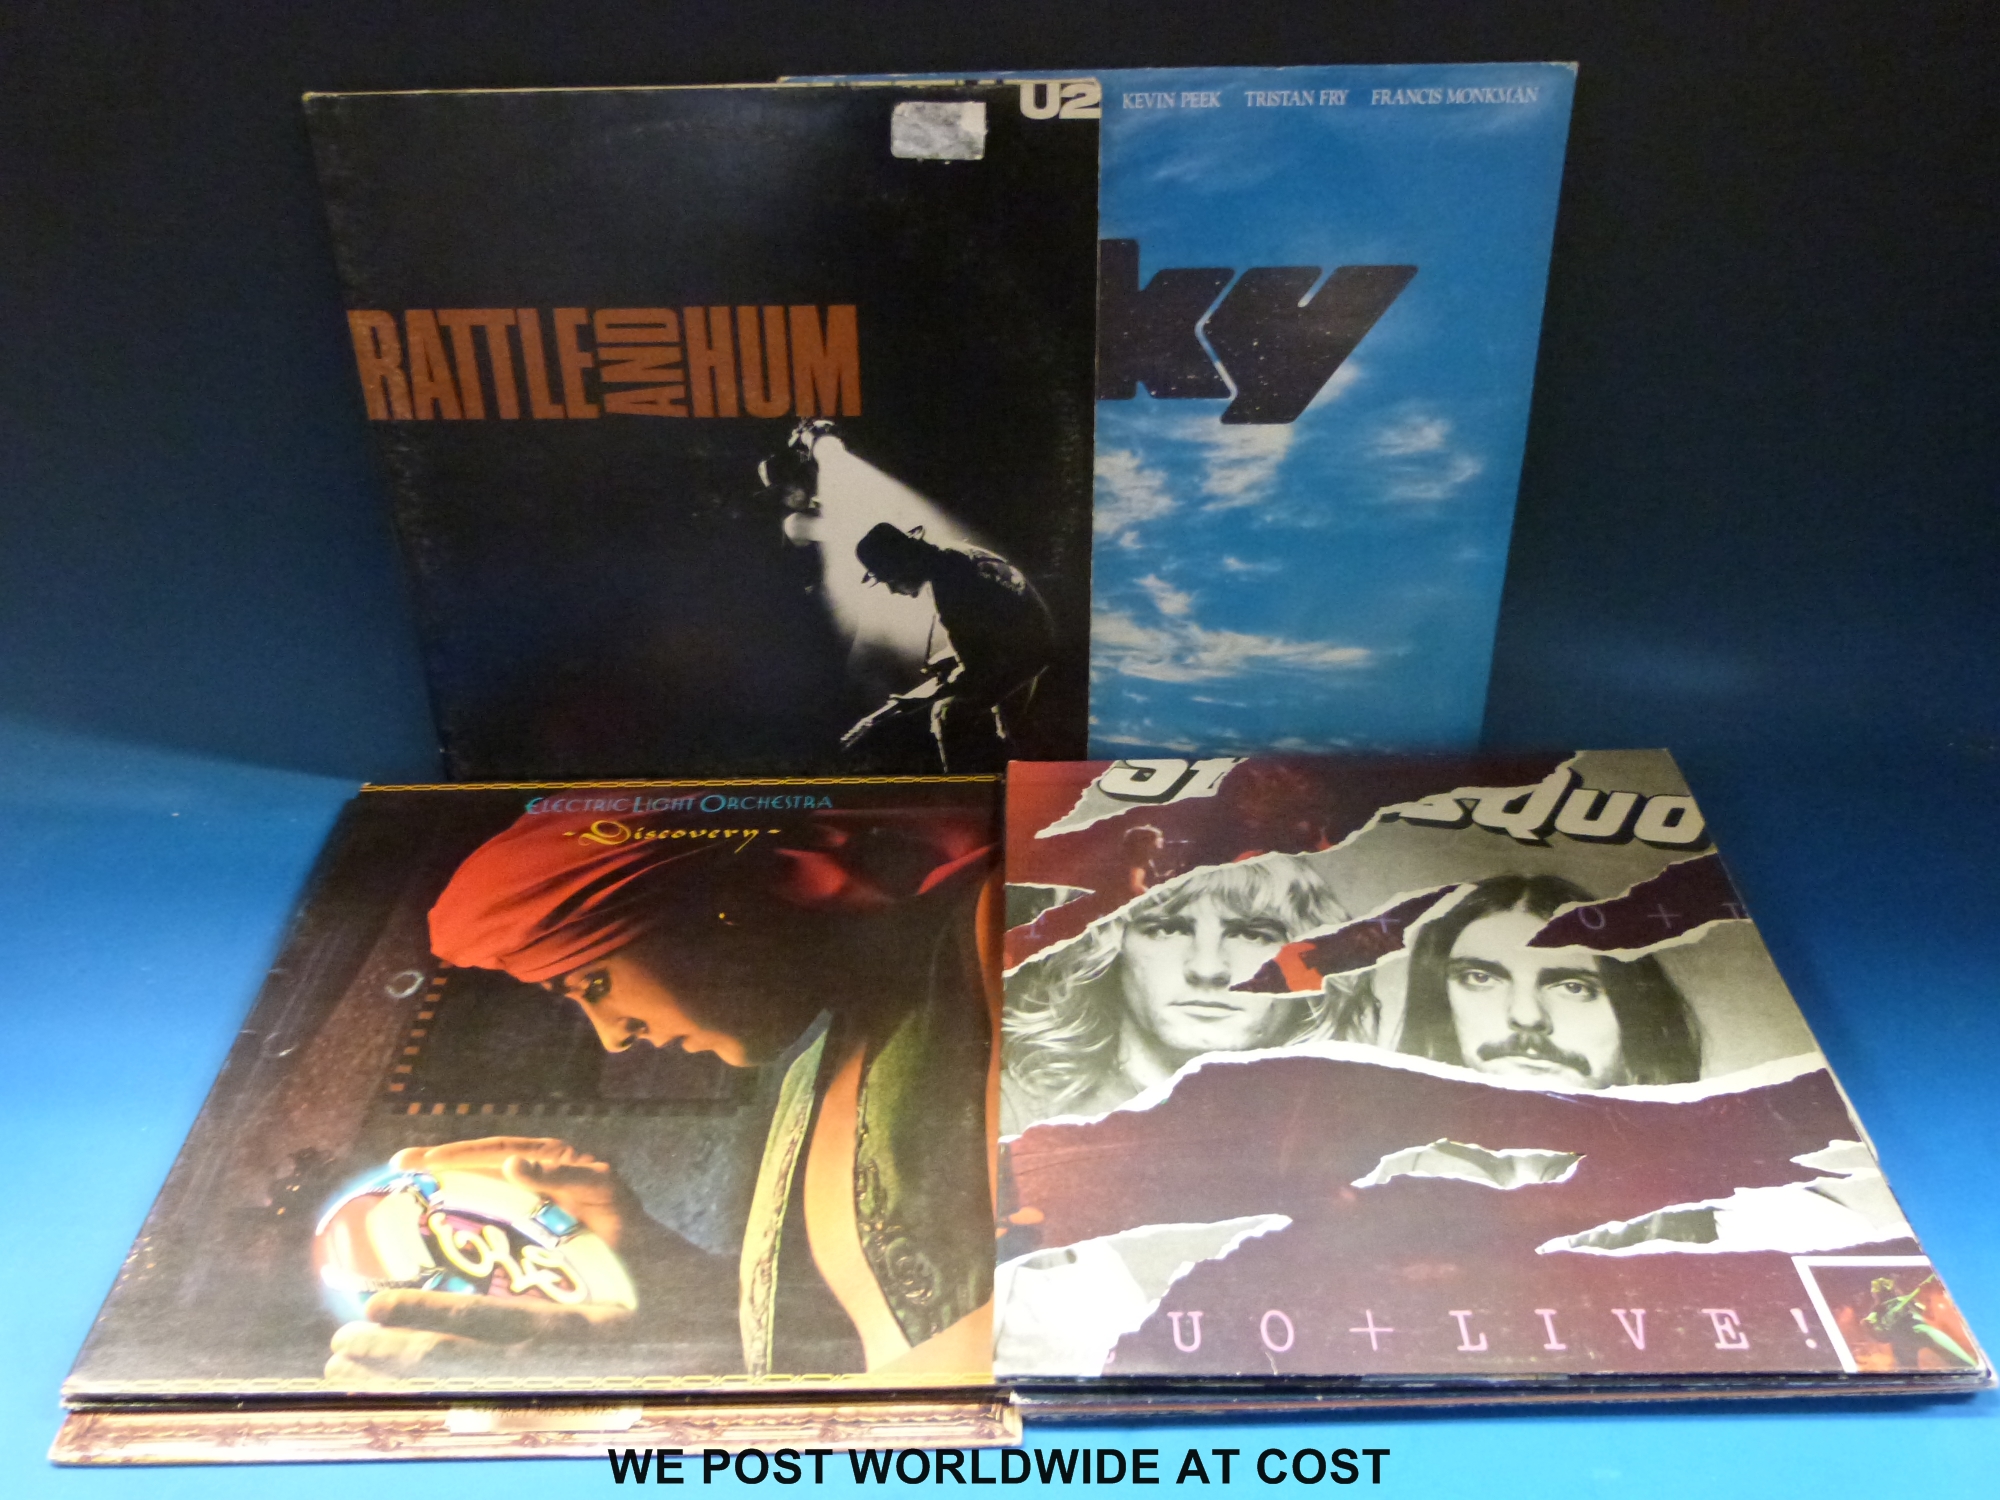 Over 35x LPs from the 1970s and 1980s including artists such as Status Quo, Genesis, ELO, - Image 3 of 3